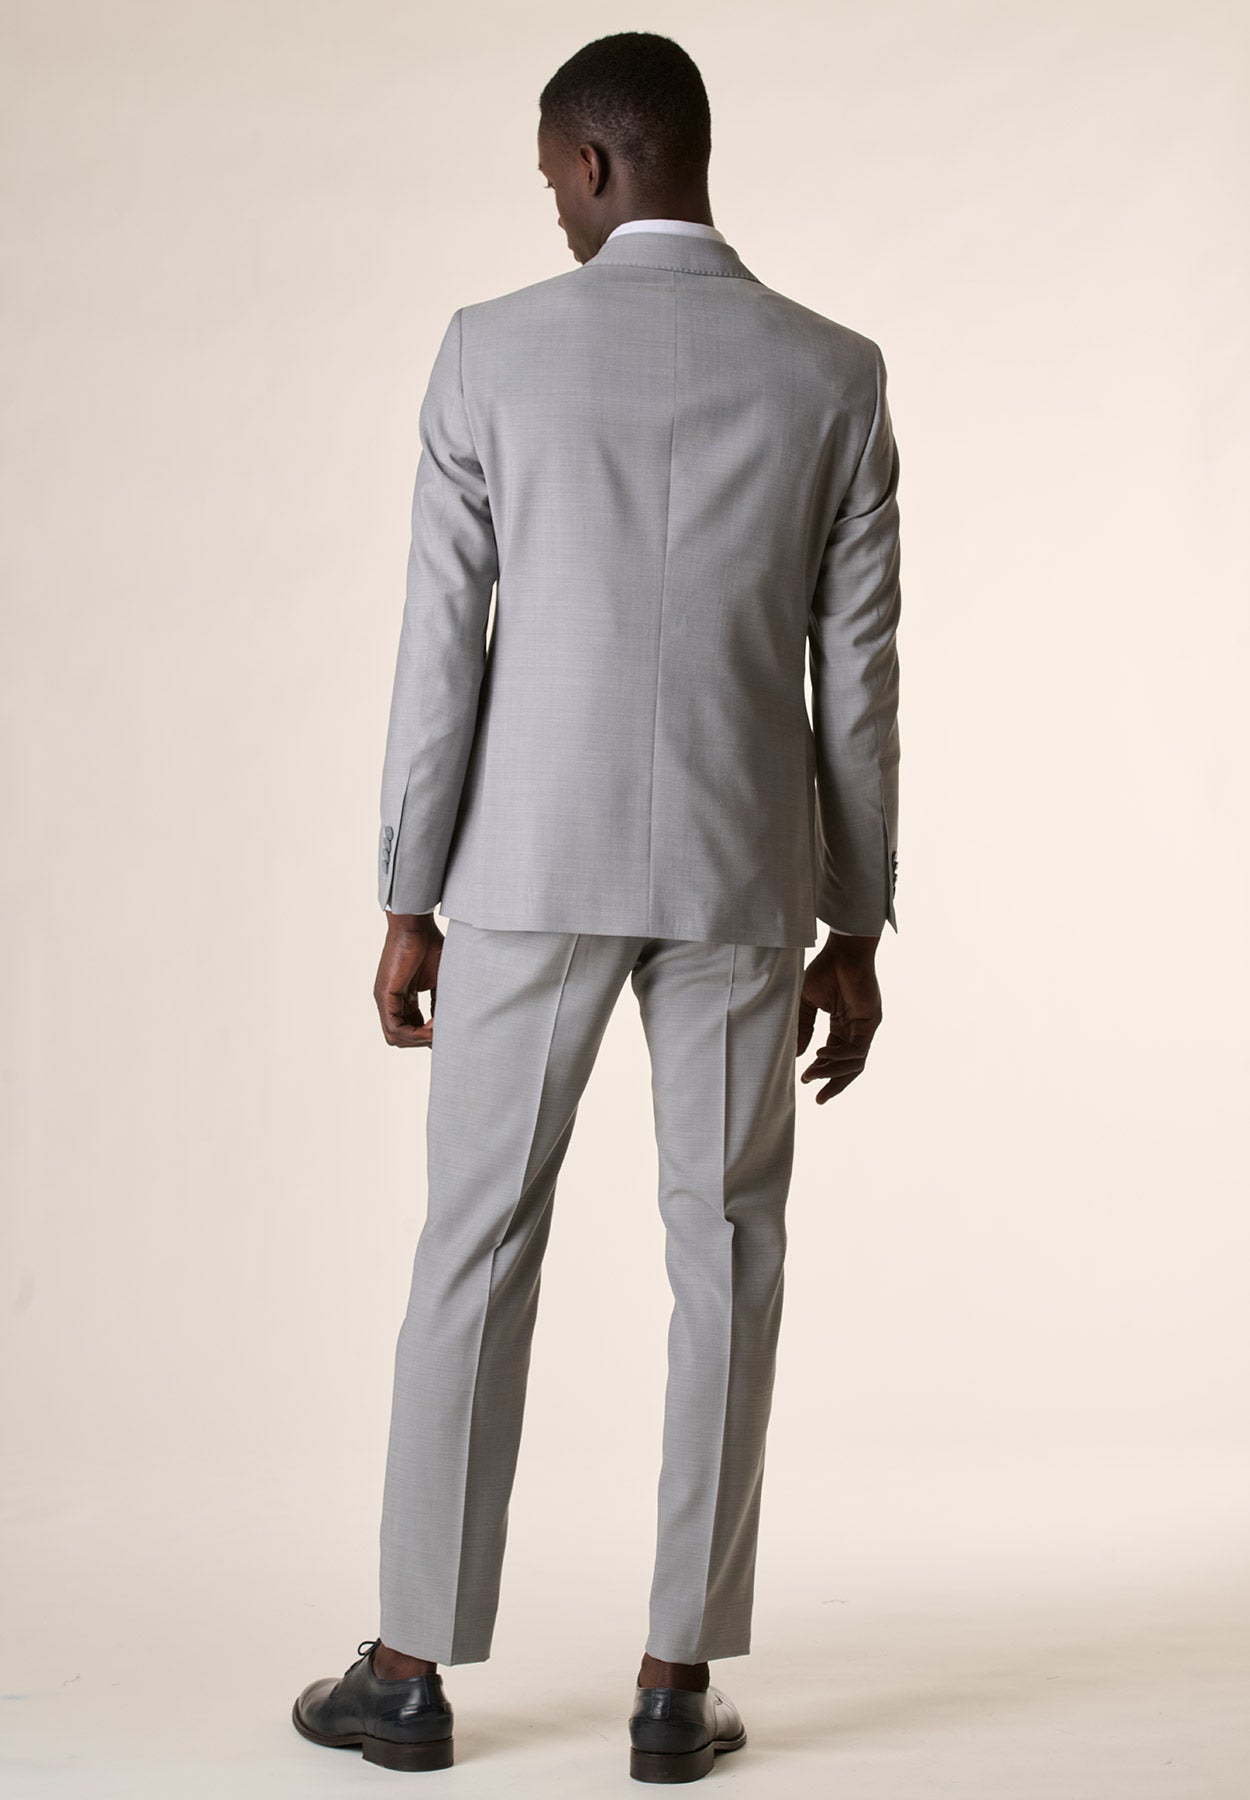 Light grey microstructured custom-fit suit